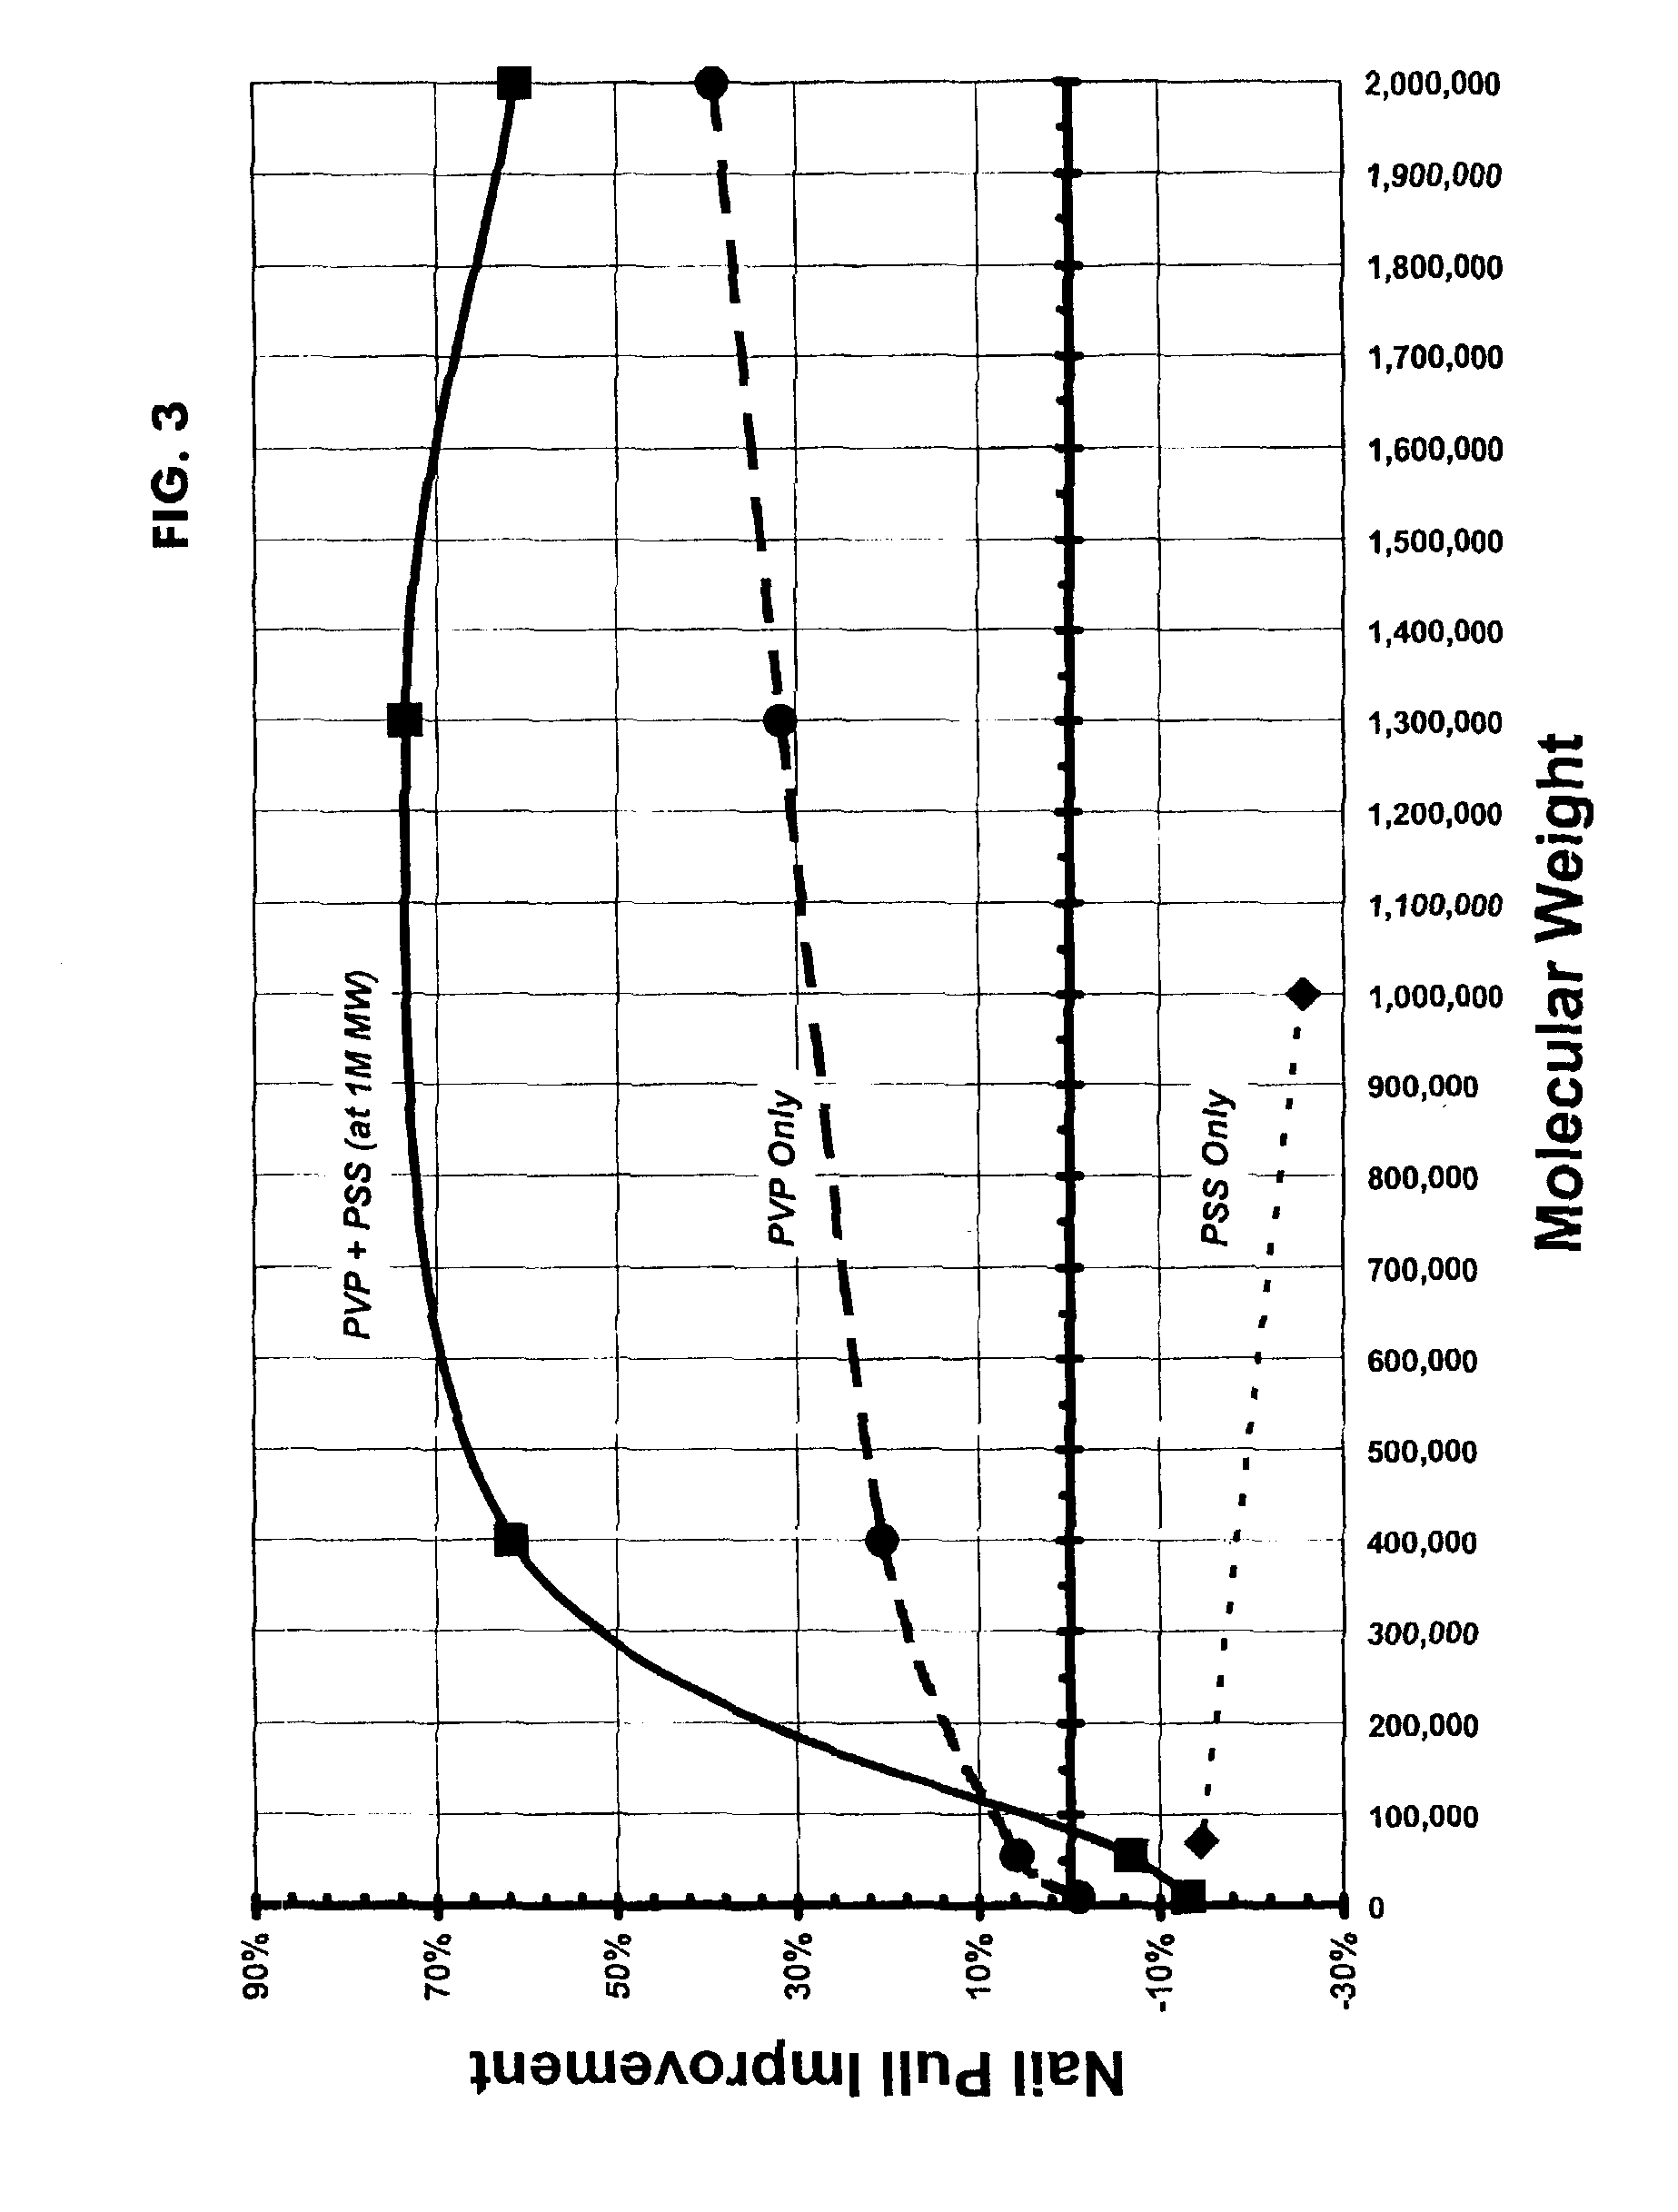 Method and composition for polymer-reinforced composite cementitious construction material